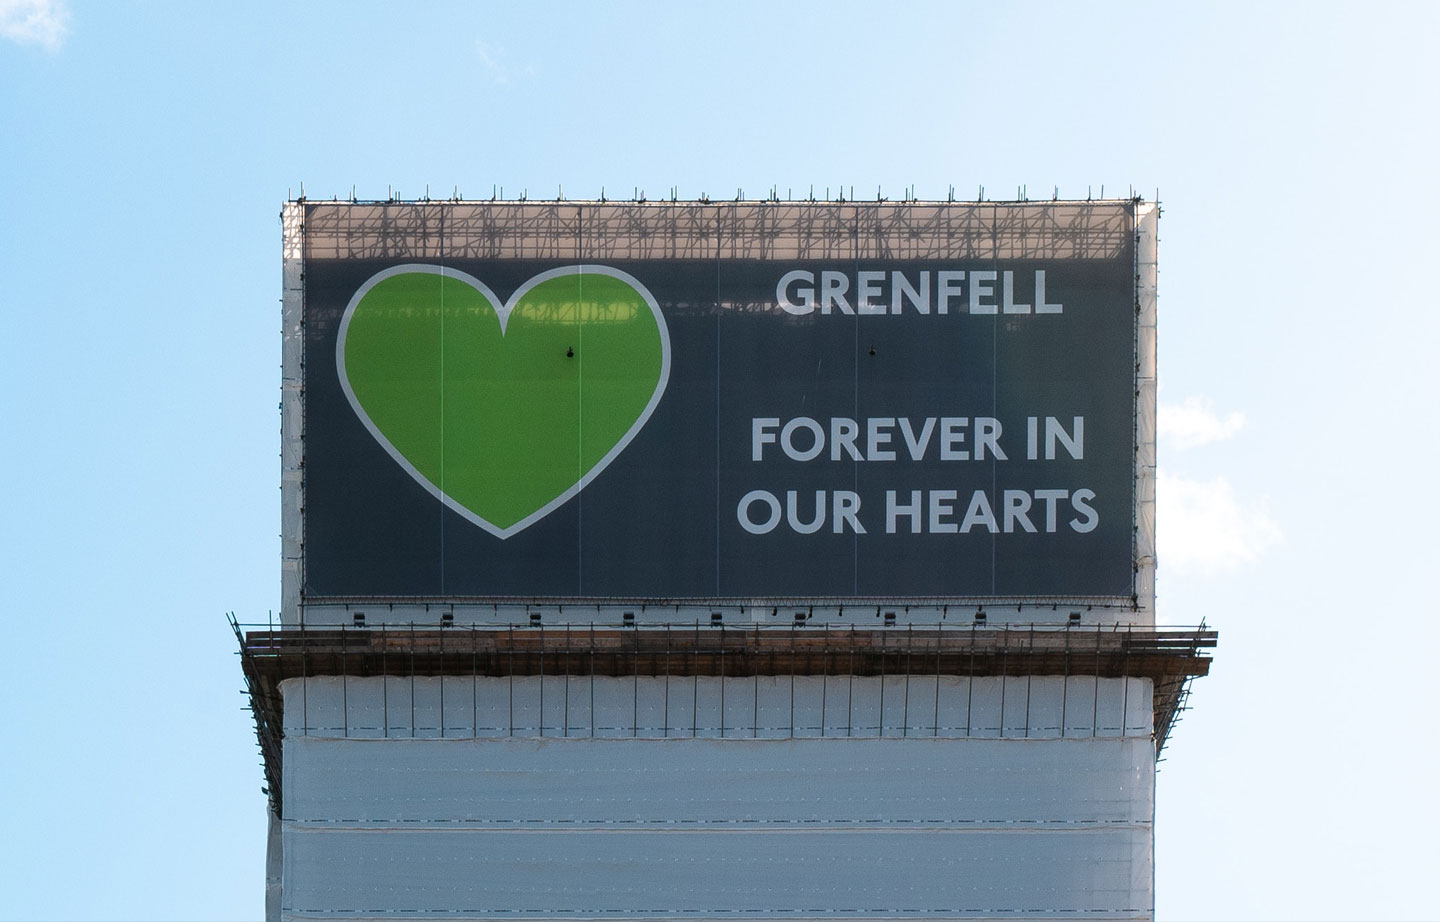 Image of a banner covering the Grenfell Tower. The banner has a large green heart and the words 